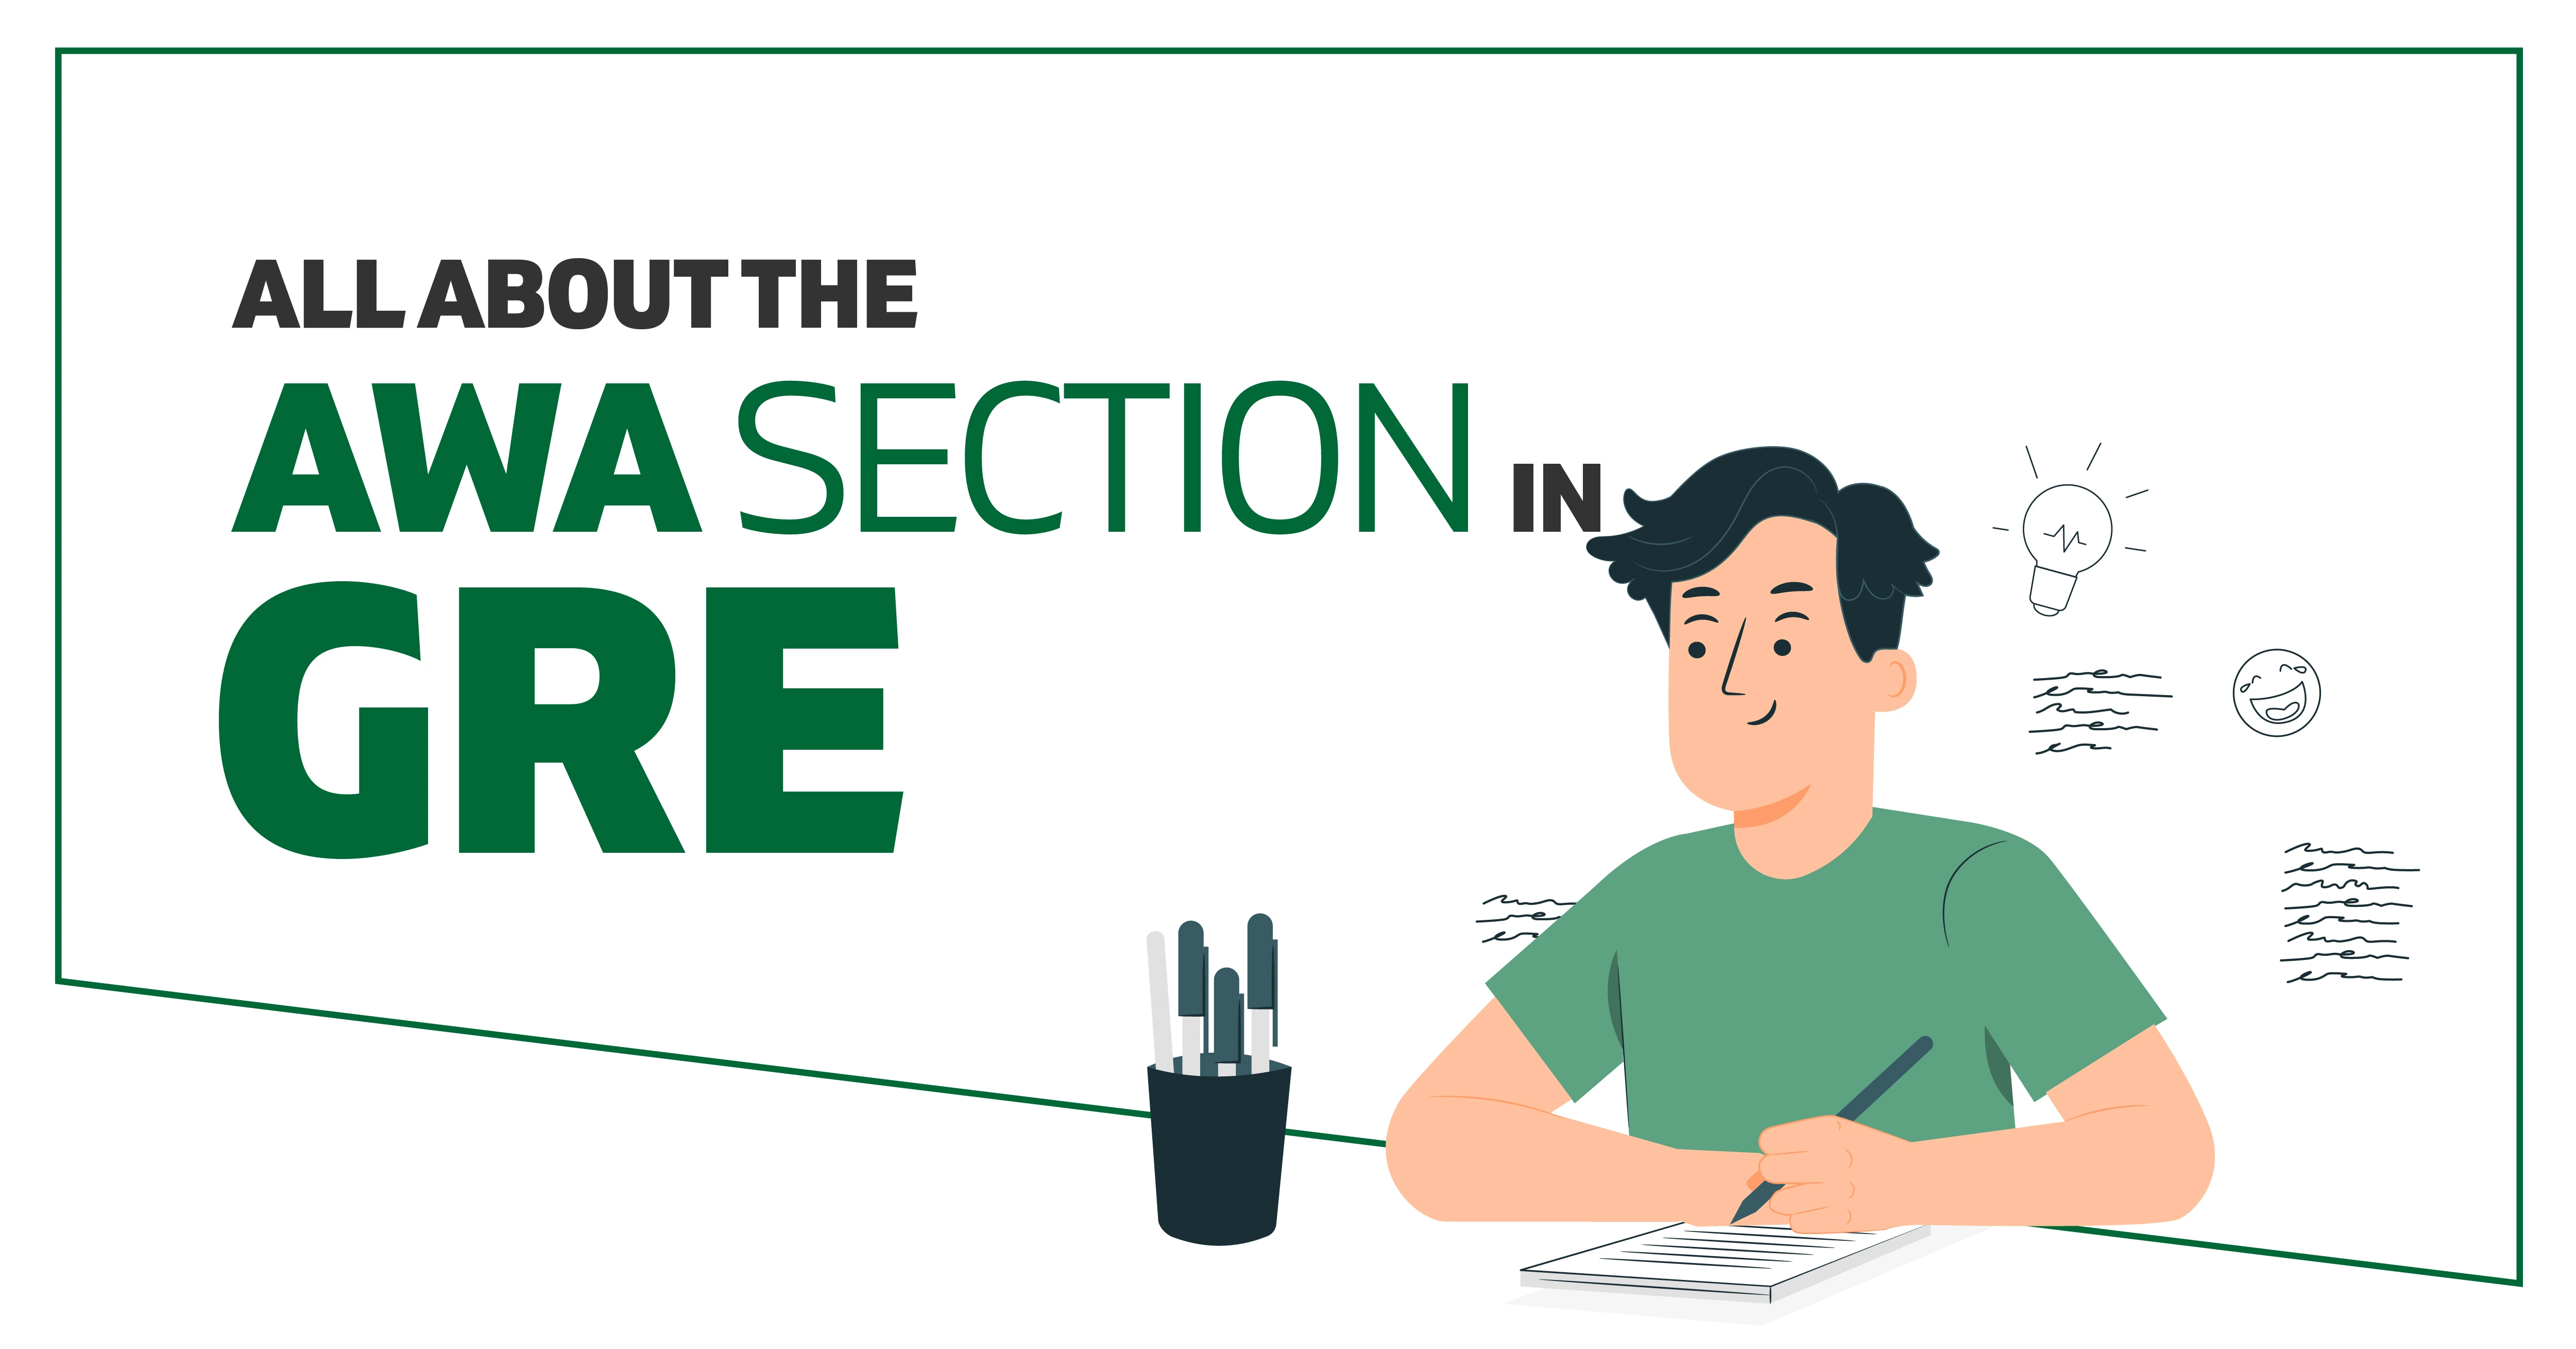 All about the awa section in GRE